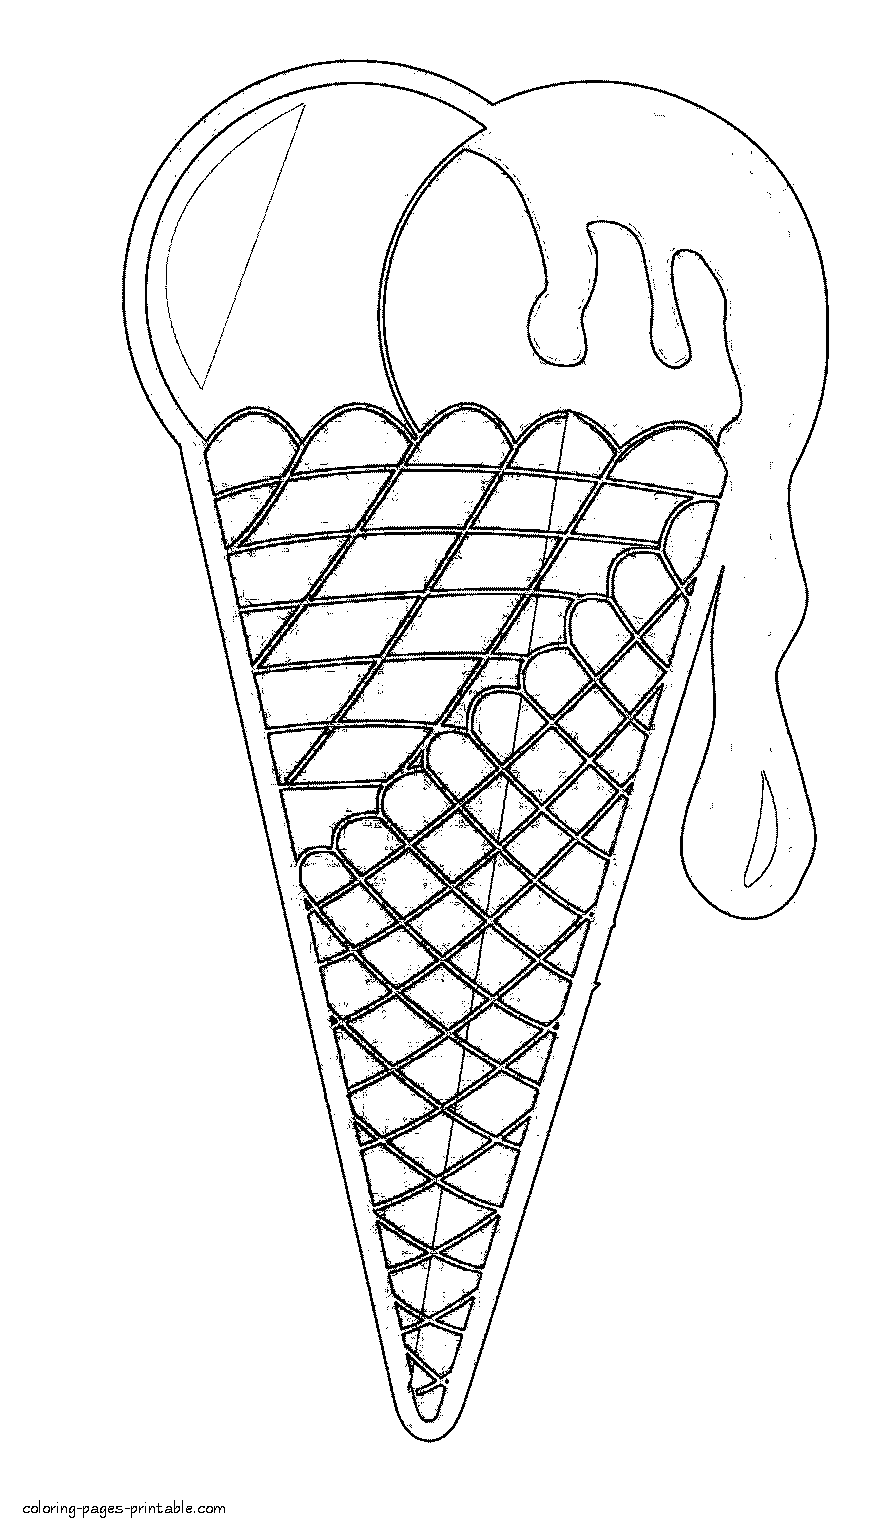 Perfect ice cream cone coloring pages